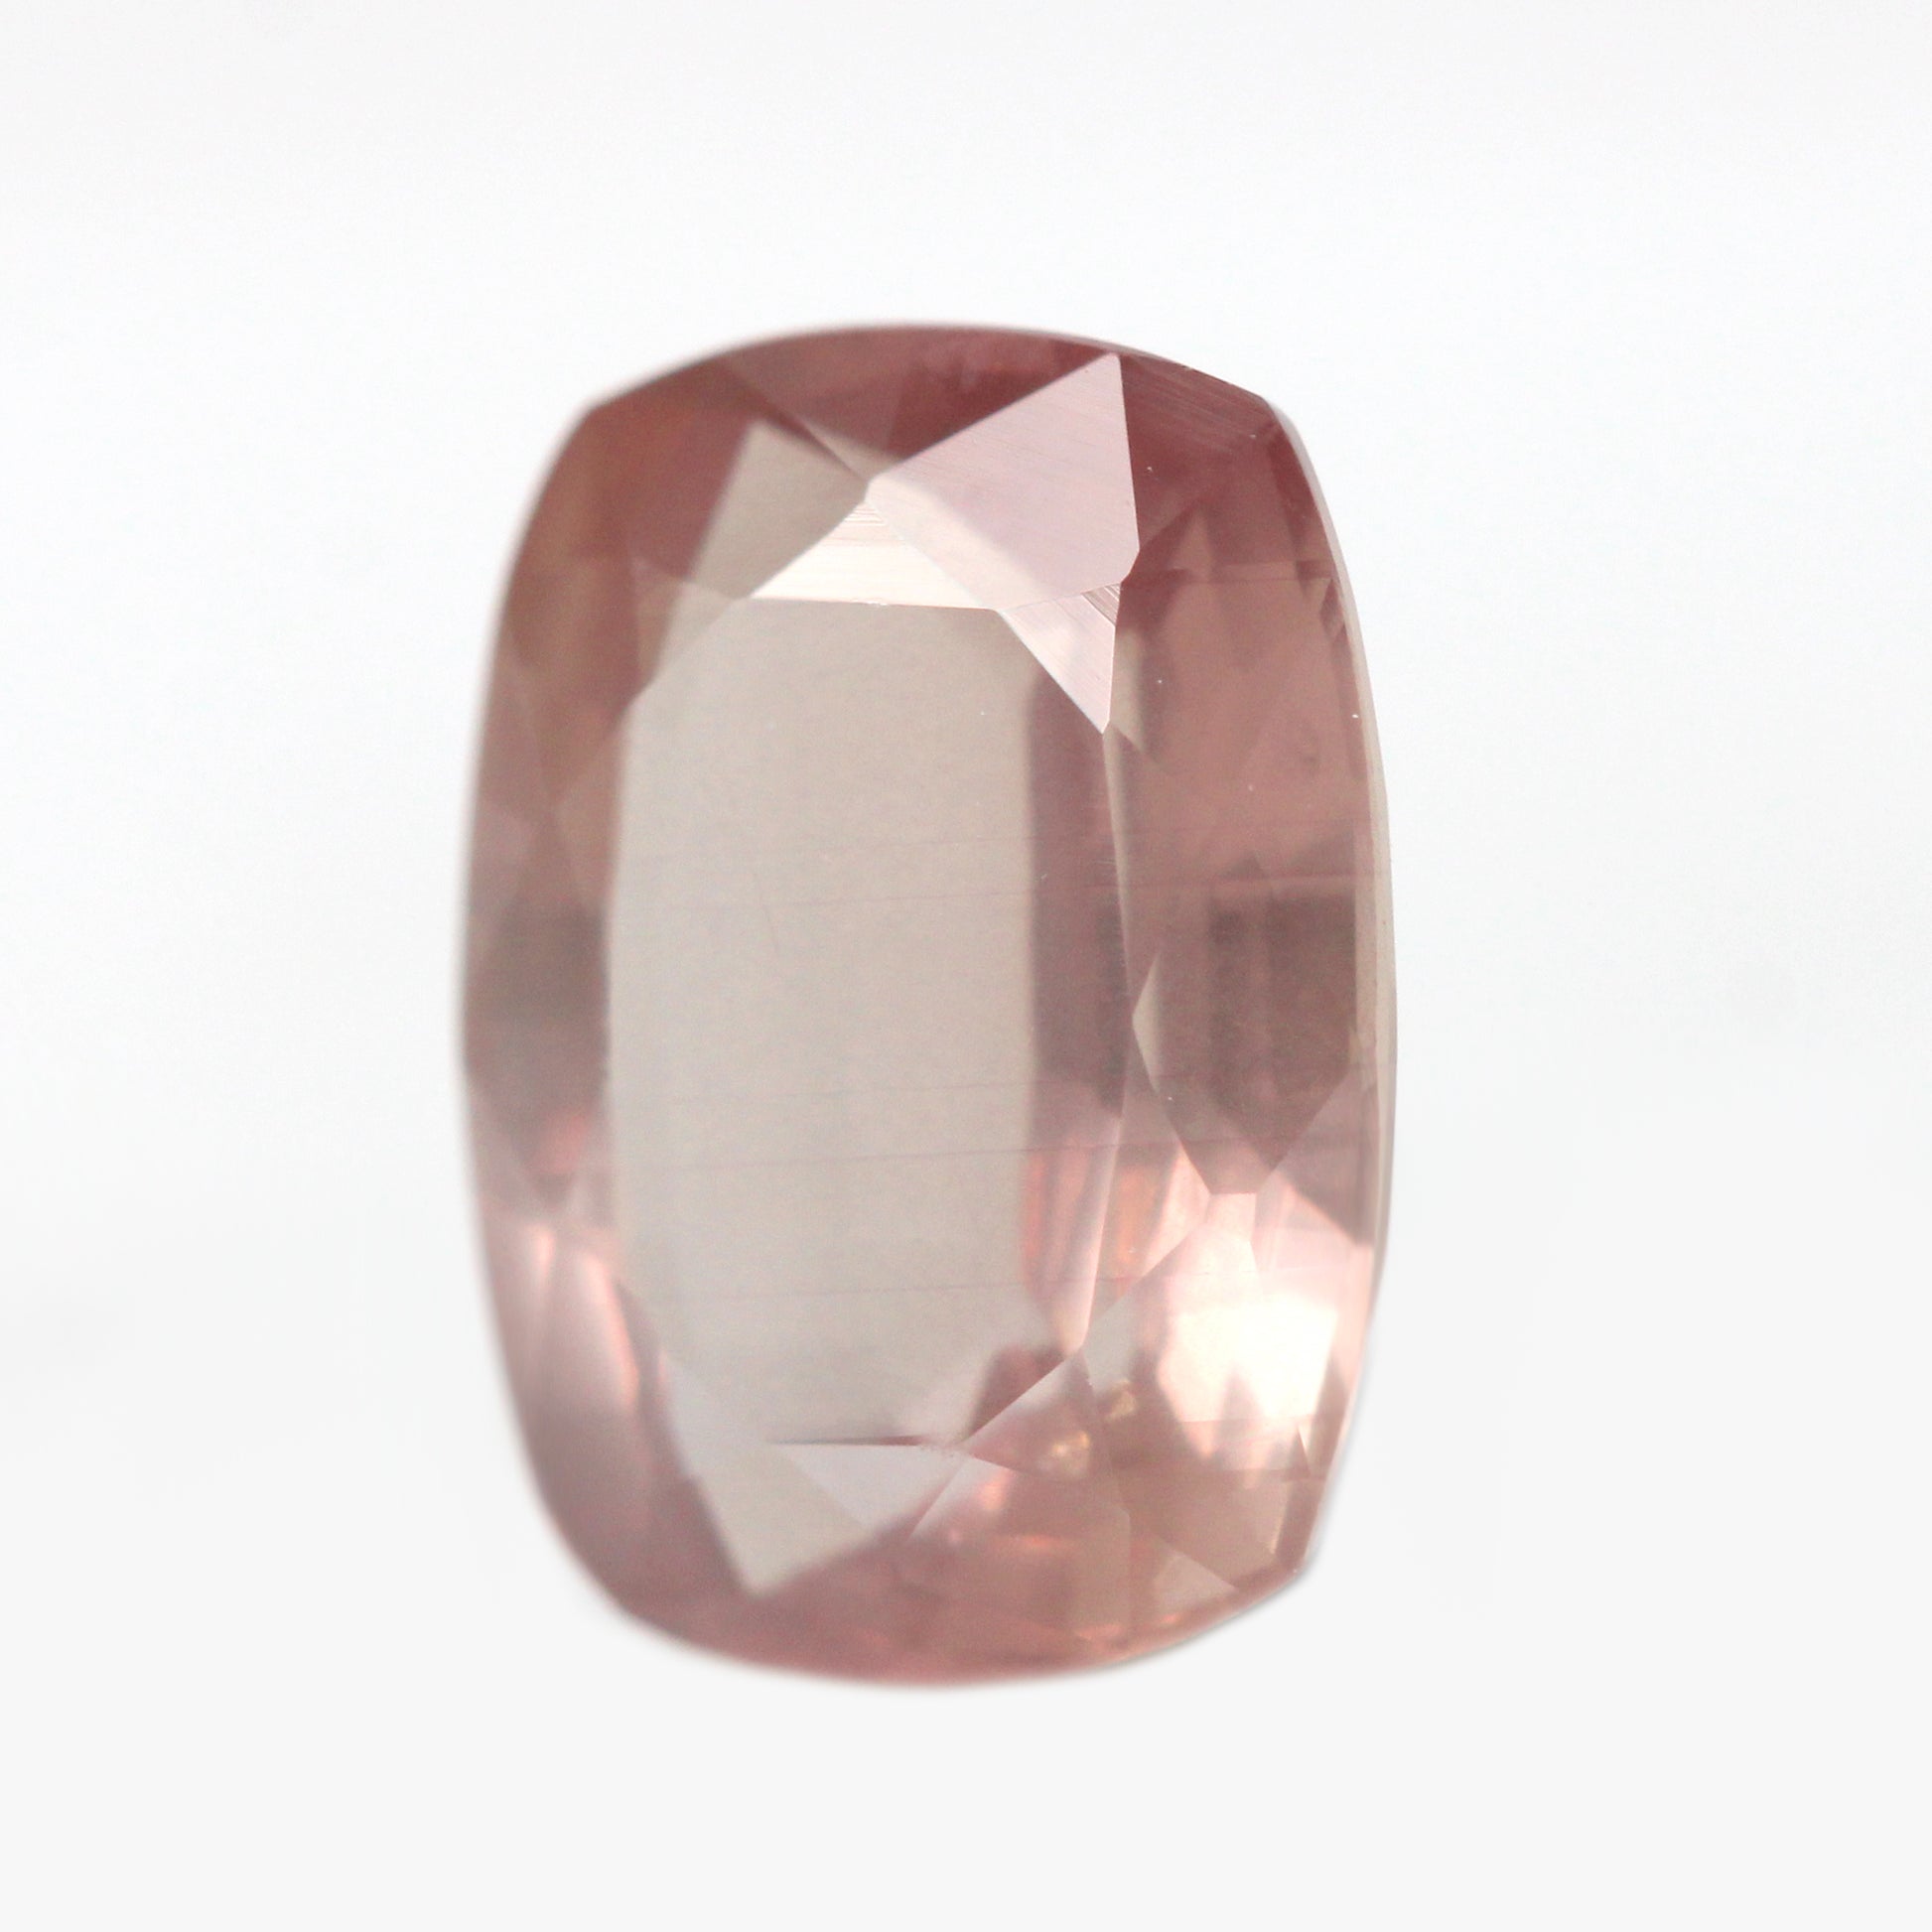 1.60 Carat Elongated Cushion Cut Light Peach Pink Sapphire for Custom Work - Inventory Code CPS160 - Midwinter Co. Alternative Bridal Rings and Modern Fine Jewelry